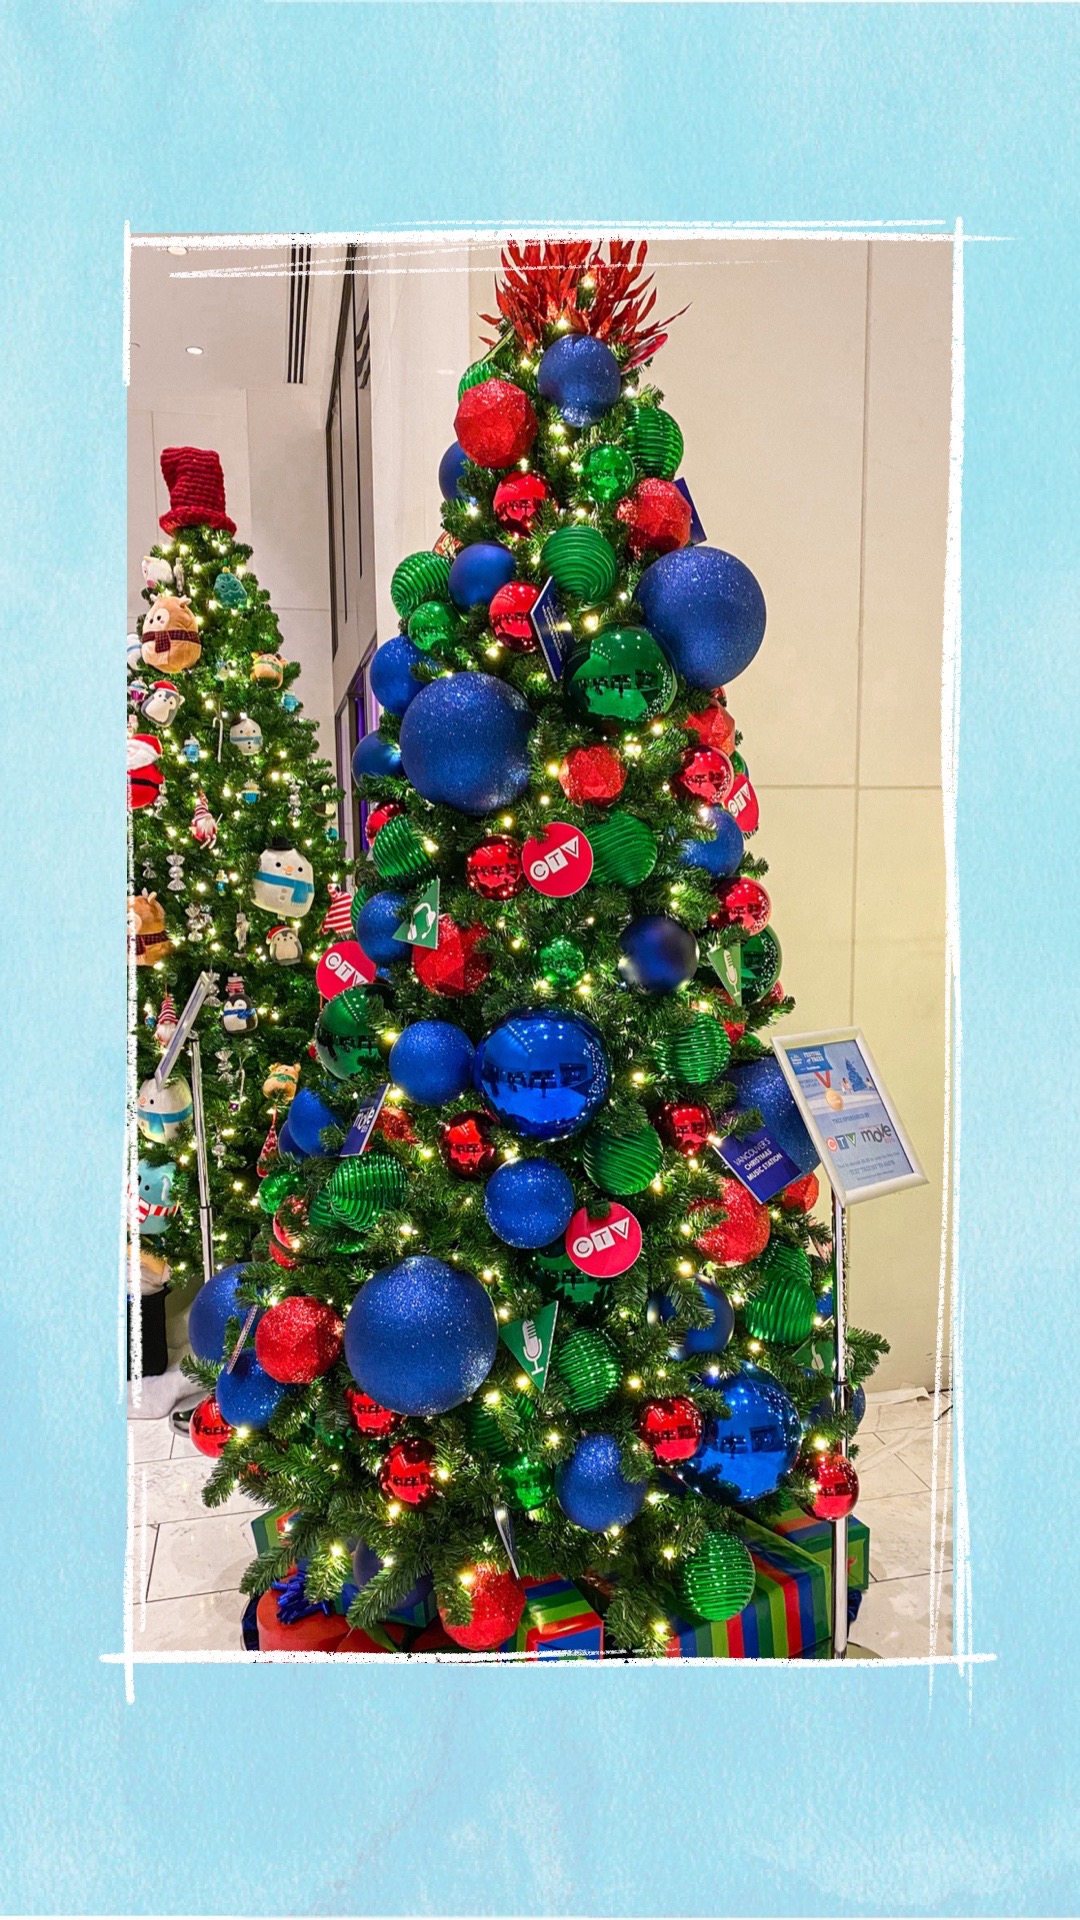 A holiday tree decorated with blue, red, and green ornaments for the BCCHF Festival of Trees